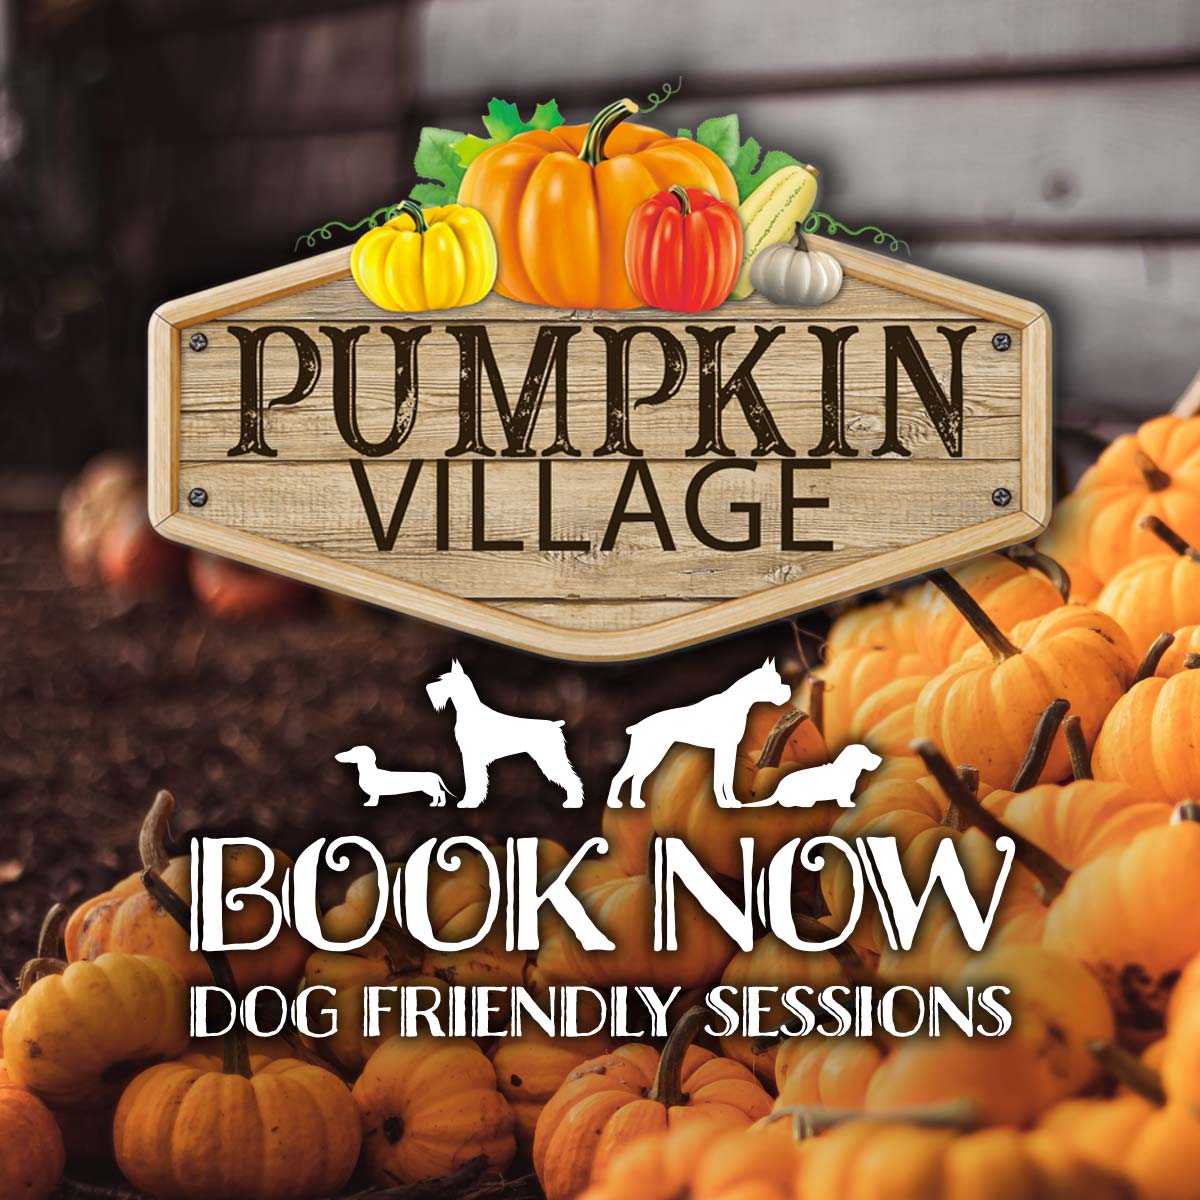 Pumpkin Picking Village - Dog Friendly Sessions Book Now